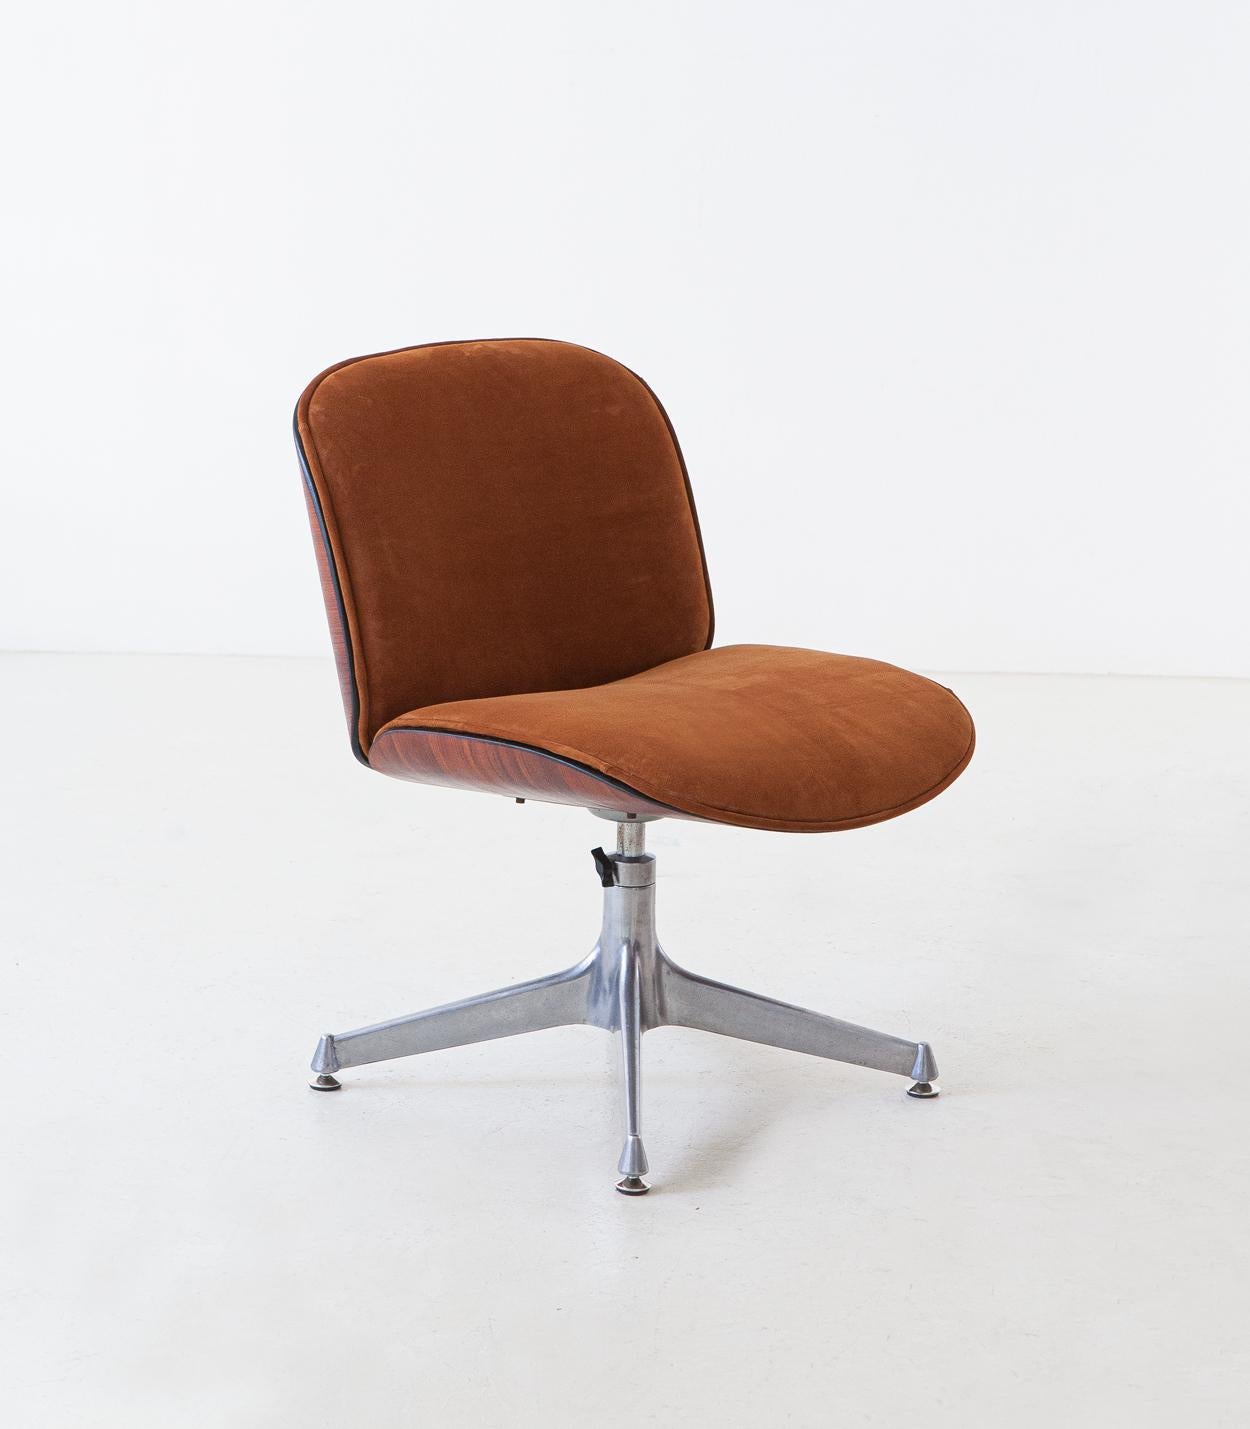 Mid-Century Modern 1950s Fully Restored Rosewood and Leather Desk Chair by Ico Parisi for MIM